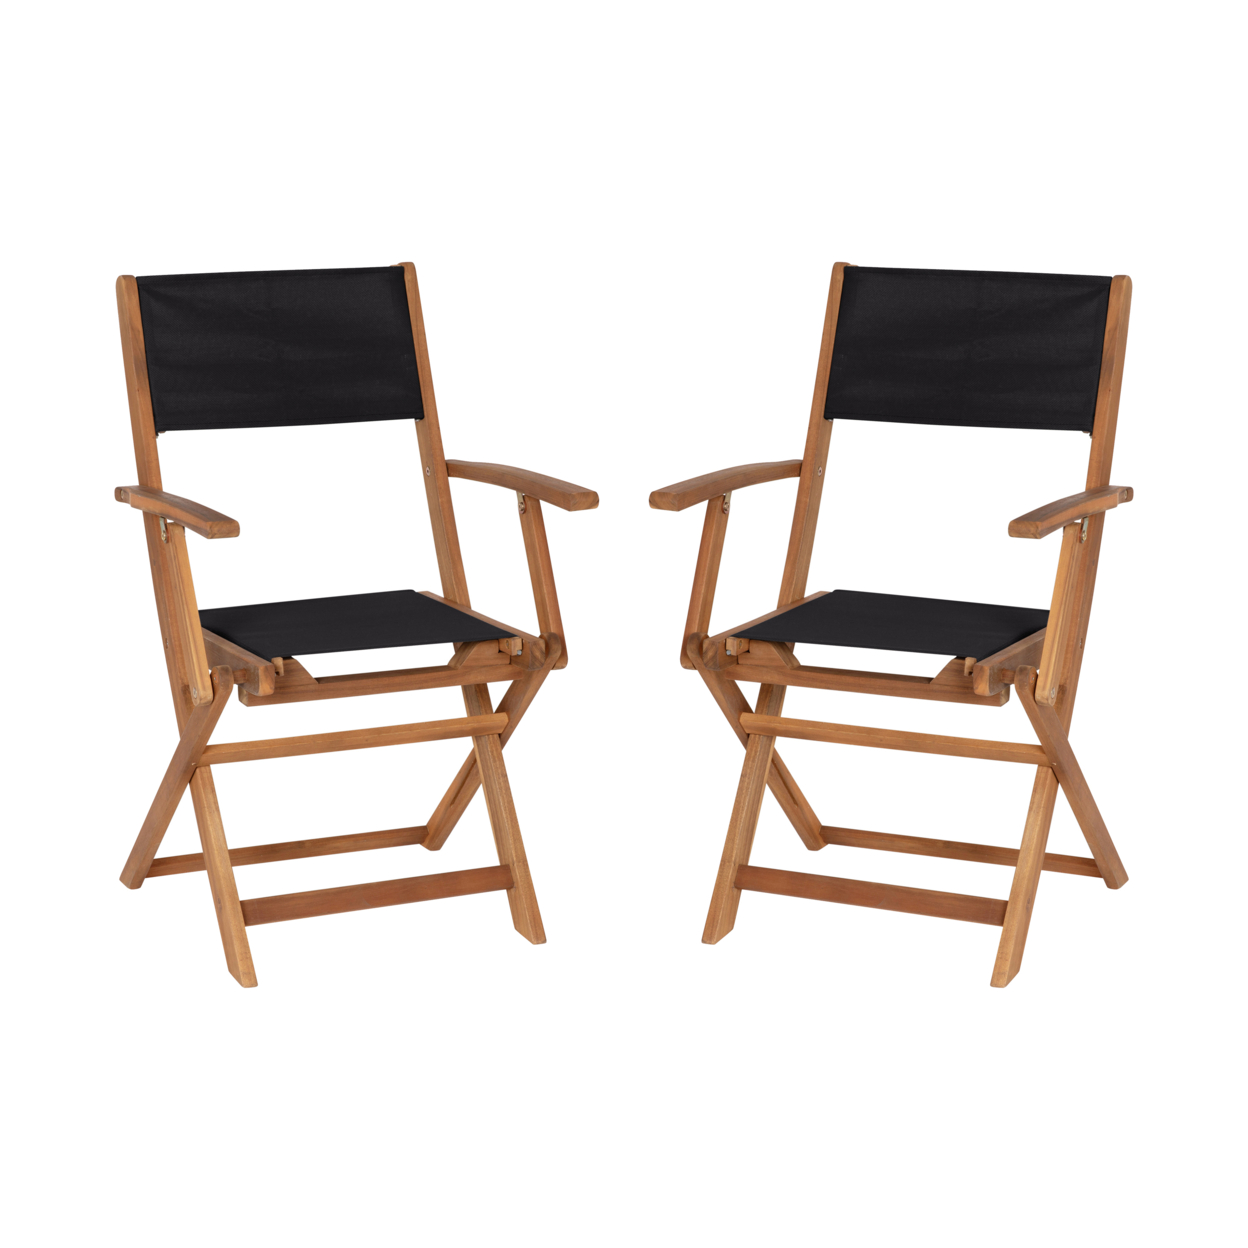 Set Of 2 Indoor Outdoor Folding Bristo Chair, Black Textilene Seat And Back